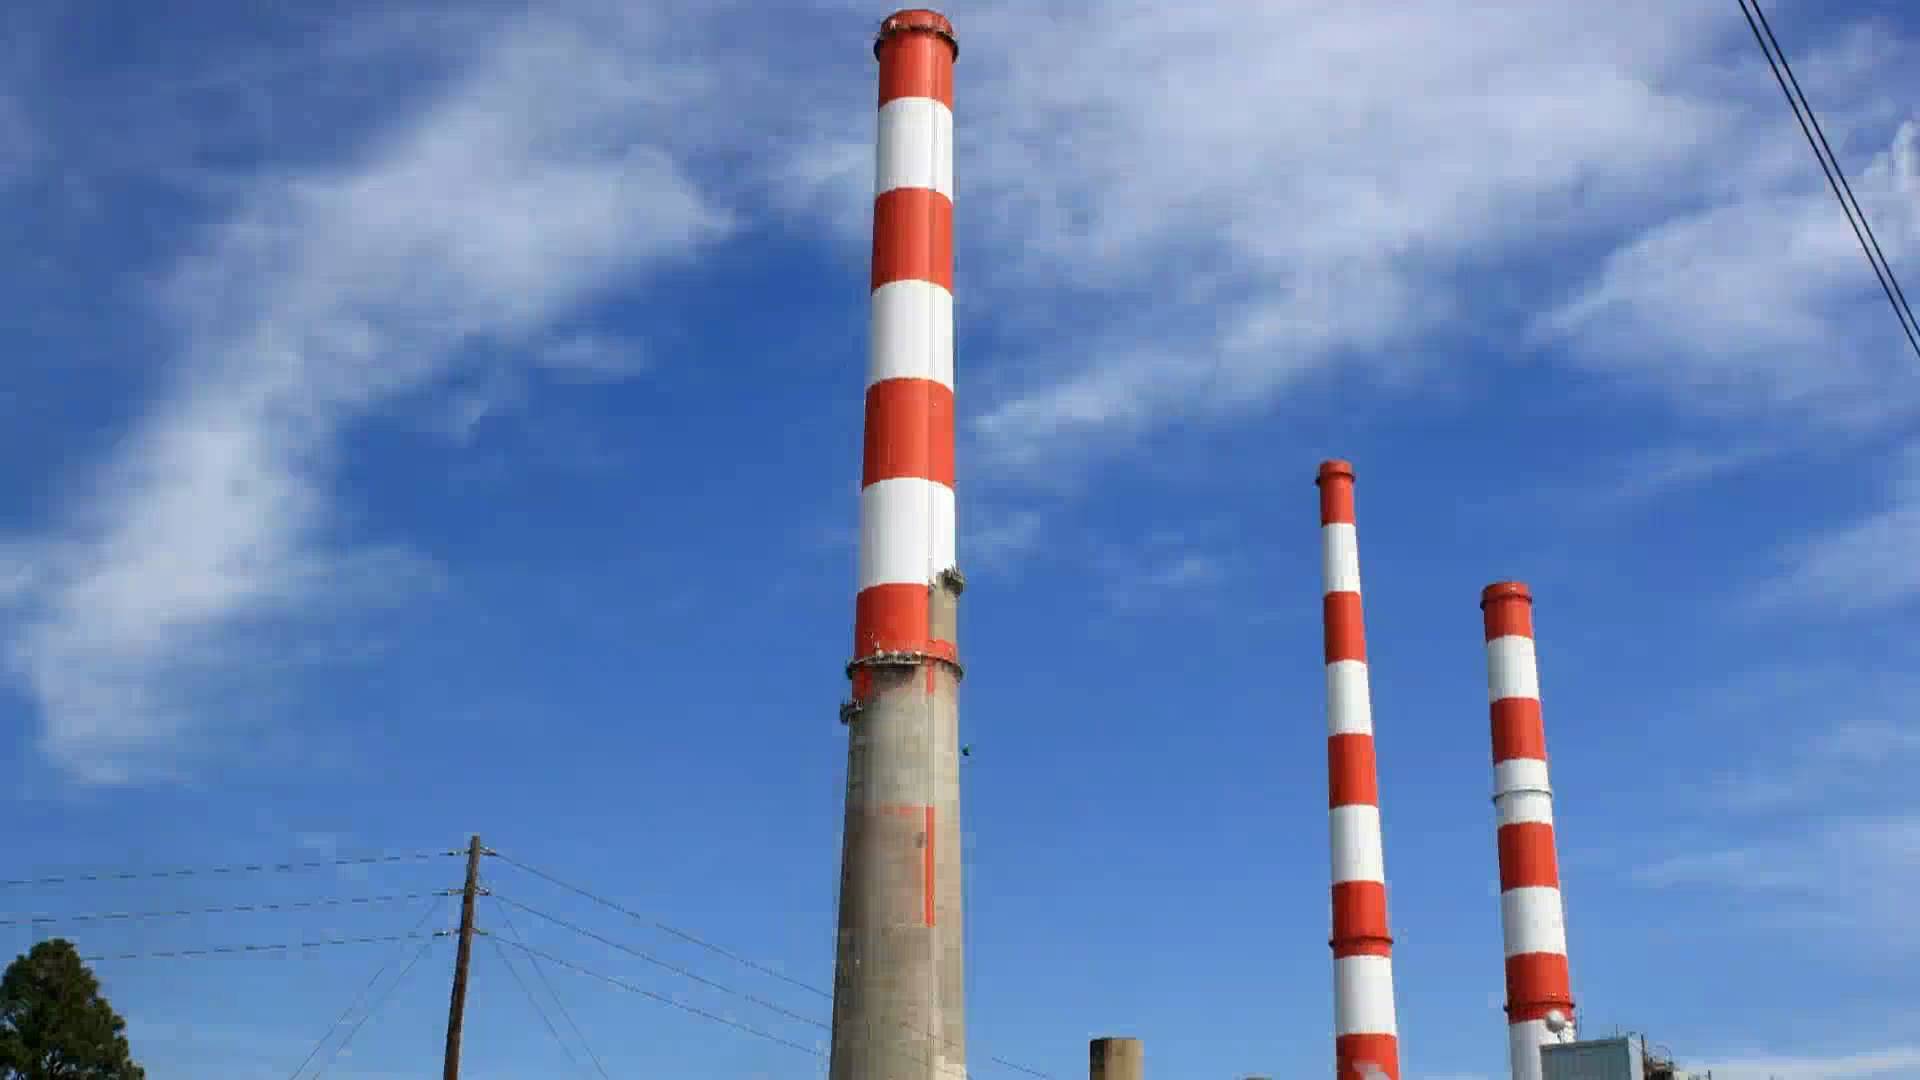 Industrial chimney smoke stack painting - YouTube